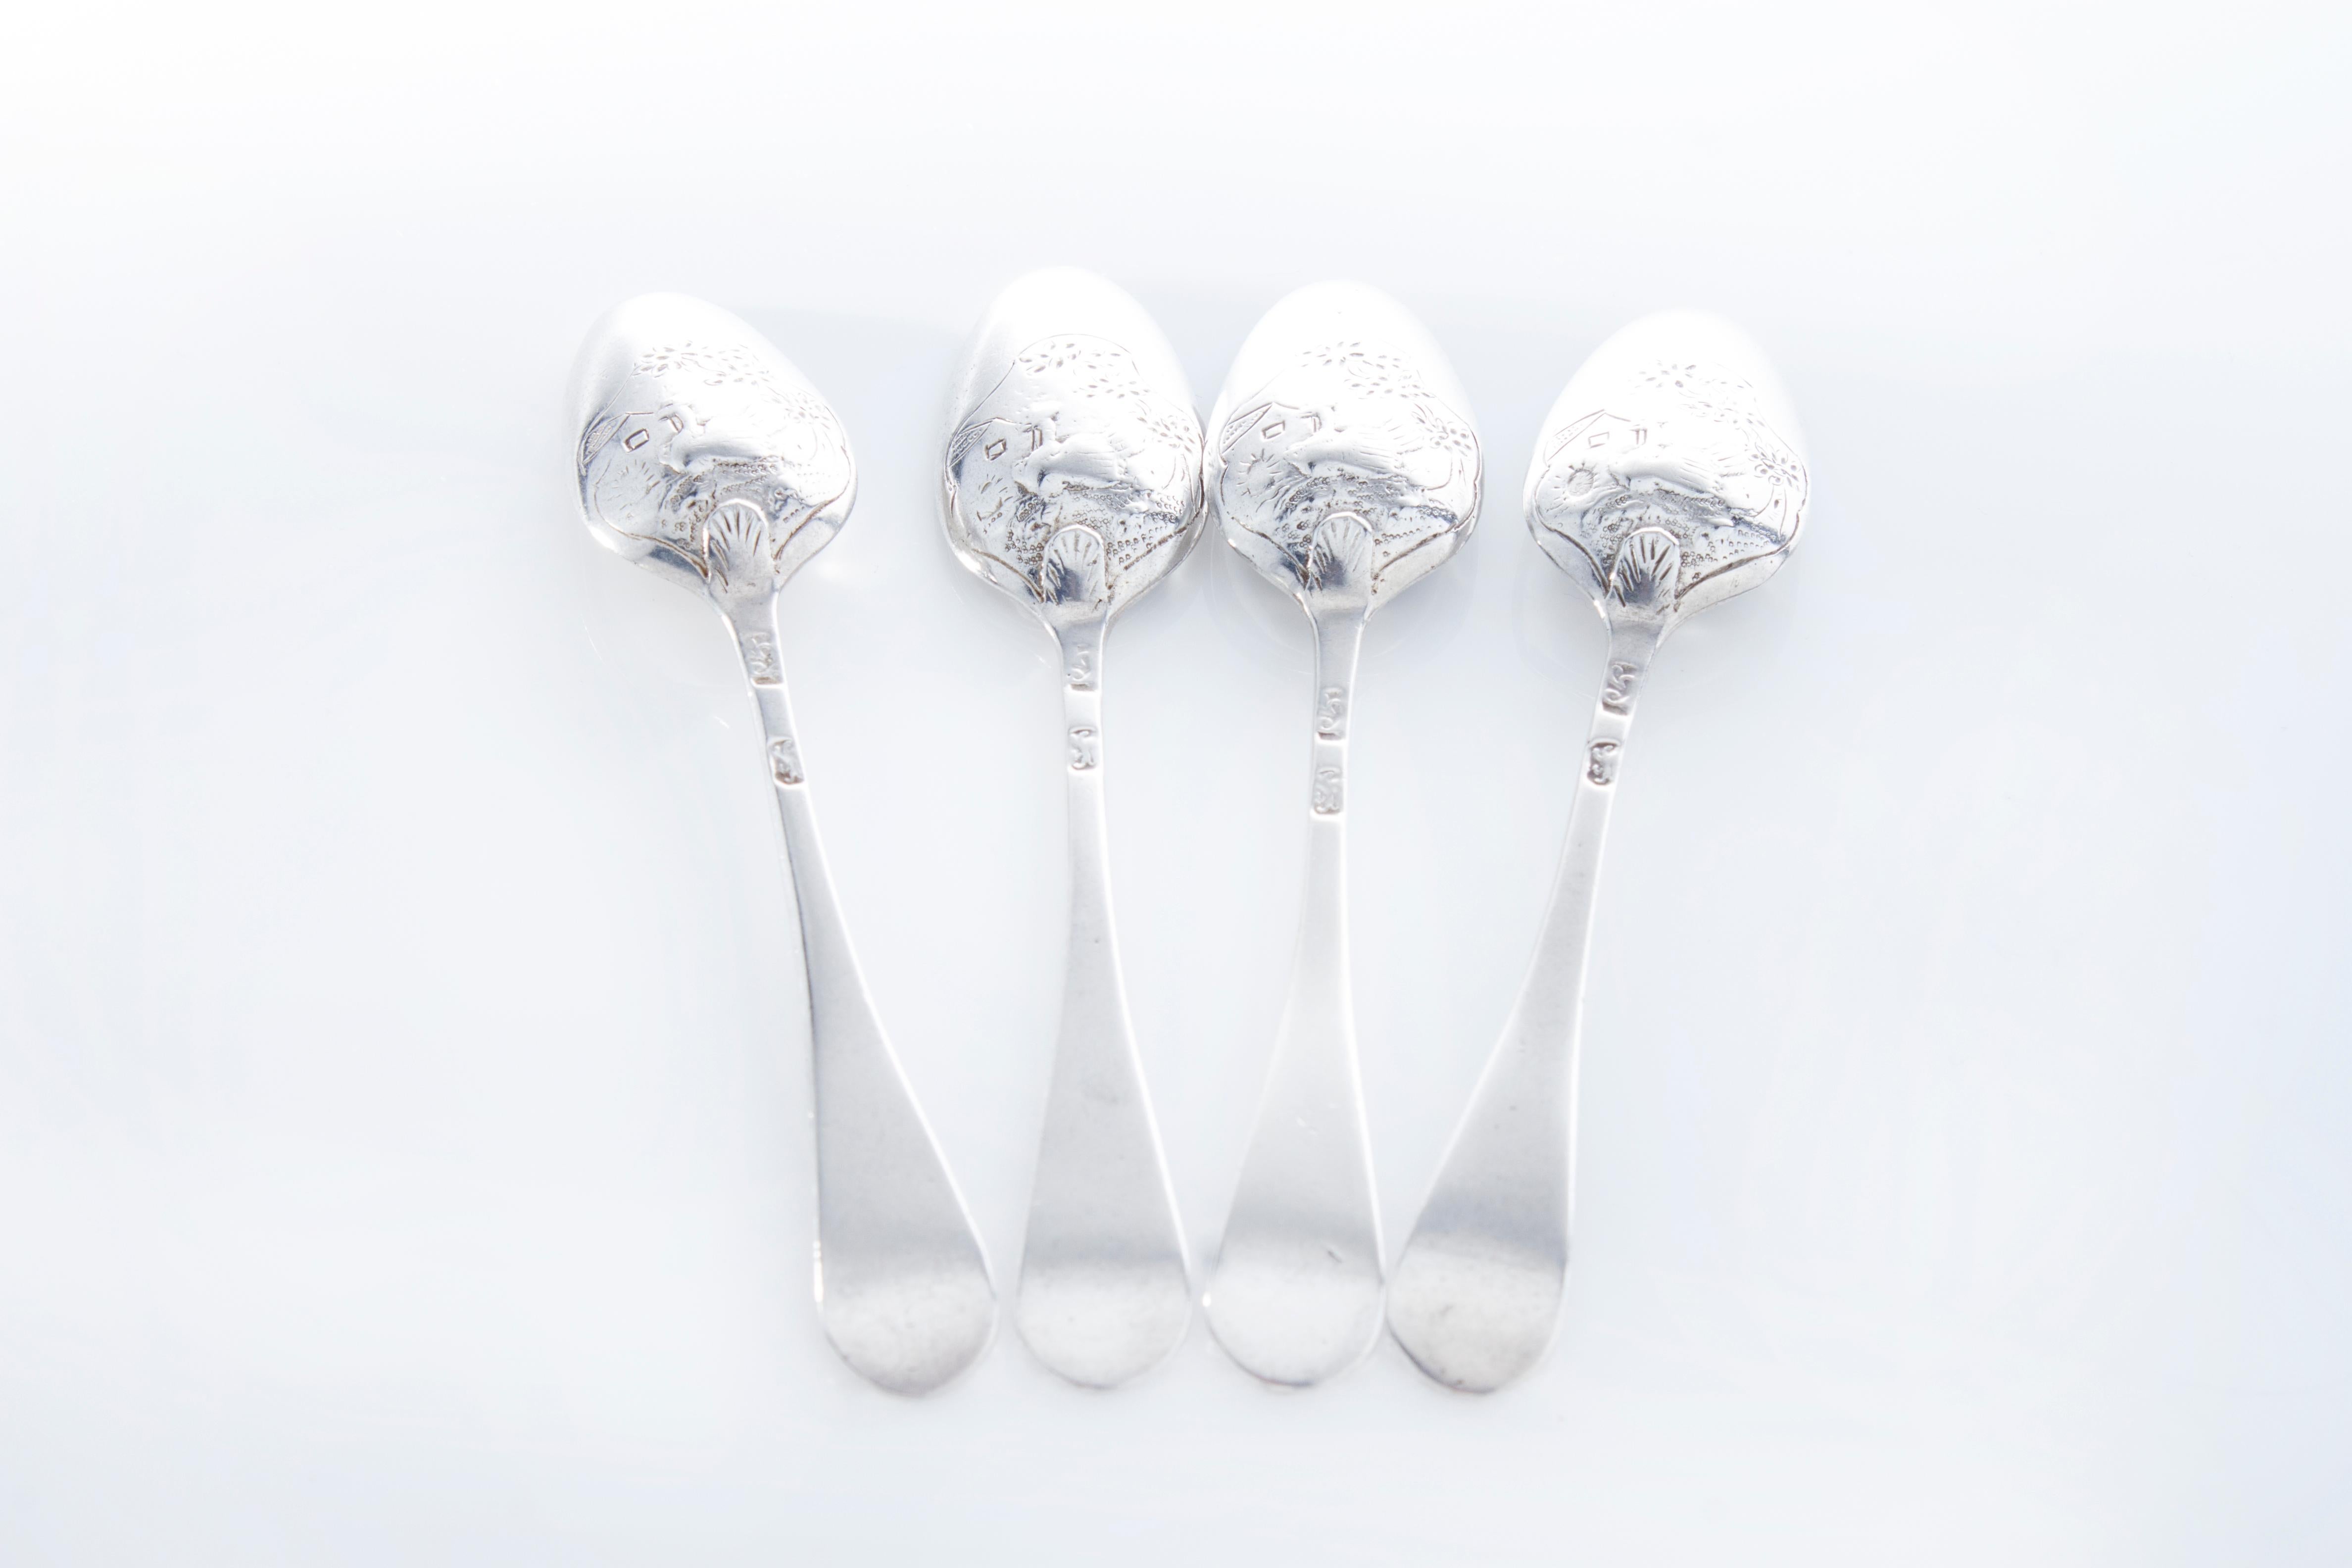 Antique Georgian sterling silver teaspoon set of 4
Maker: George Smith III
Made in England, Between 1784 / 1785
Fully hallmarked.

Dimensions -
Approx Size: 11.6 x 2.2 x 1 cm
Gross Weight: 61 grams

Condition: Minor wear from general usage,